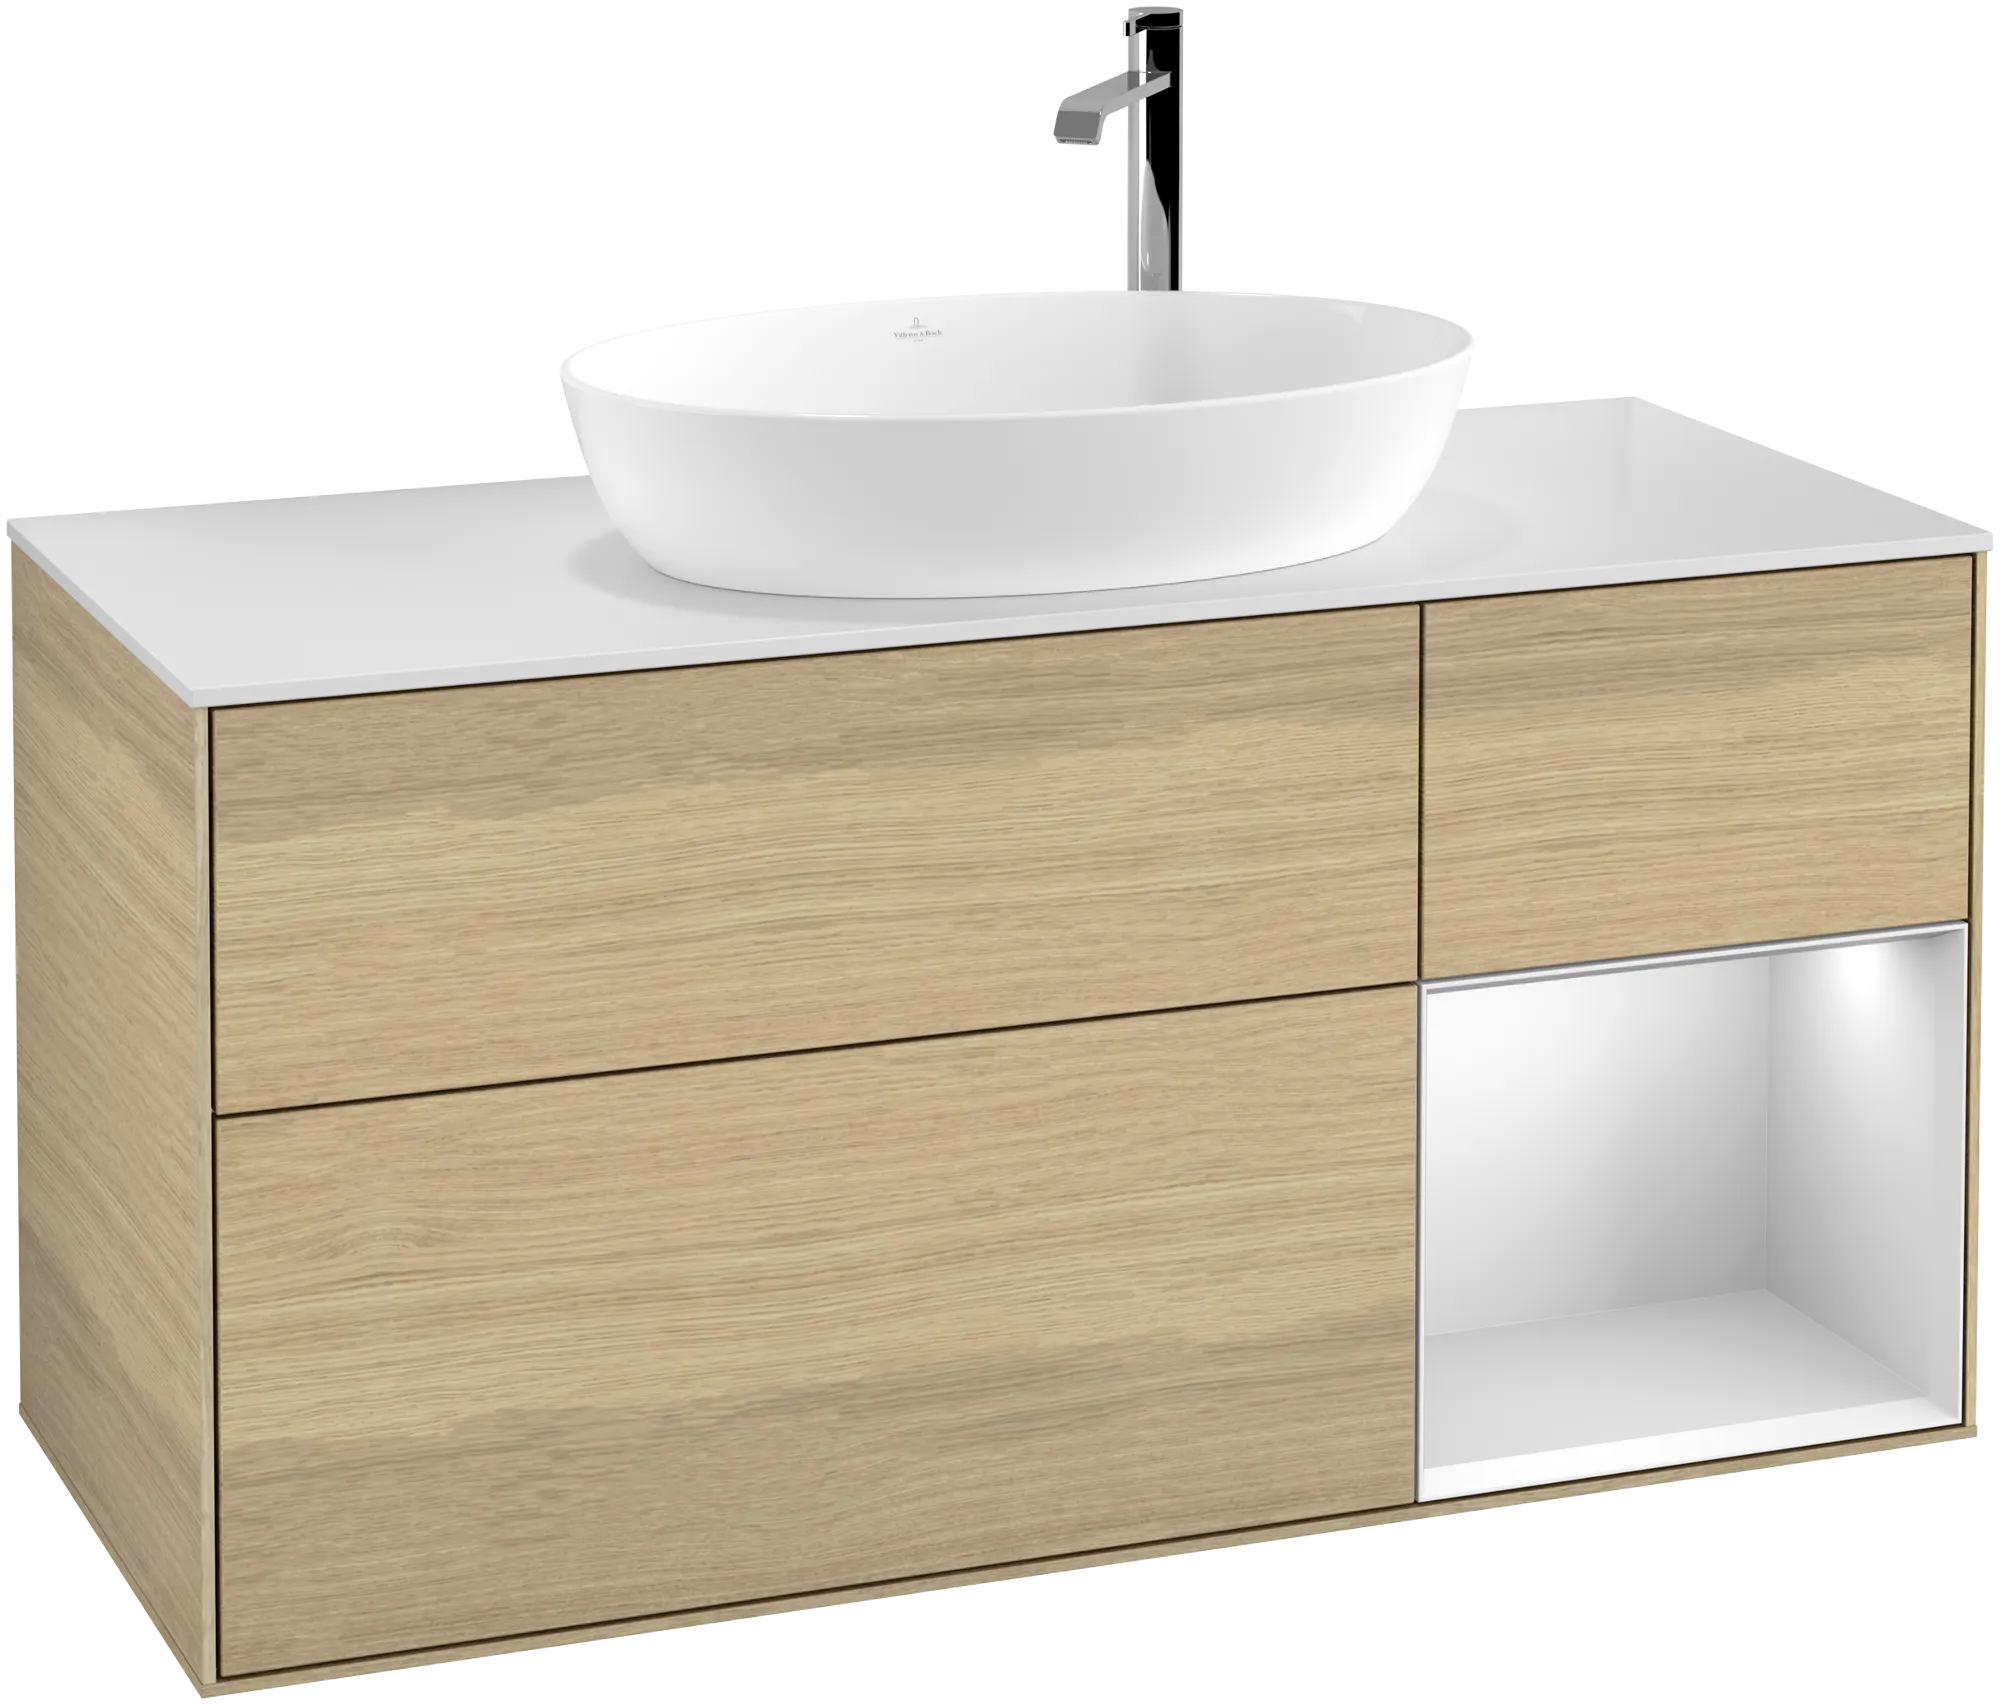 Picture of VILLEROY BOCH Finion Vanity unit, with lighting, 3 pull-out compartments, 1200 x 603 x 501 mm, Oak Veneer / White Matt Lacquer / Glass White Matt #G951MTPC